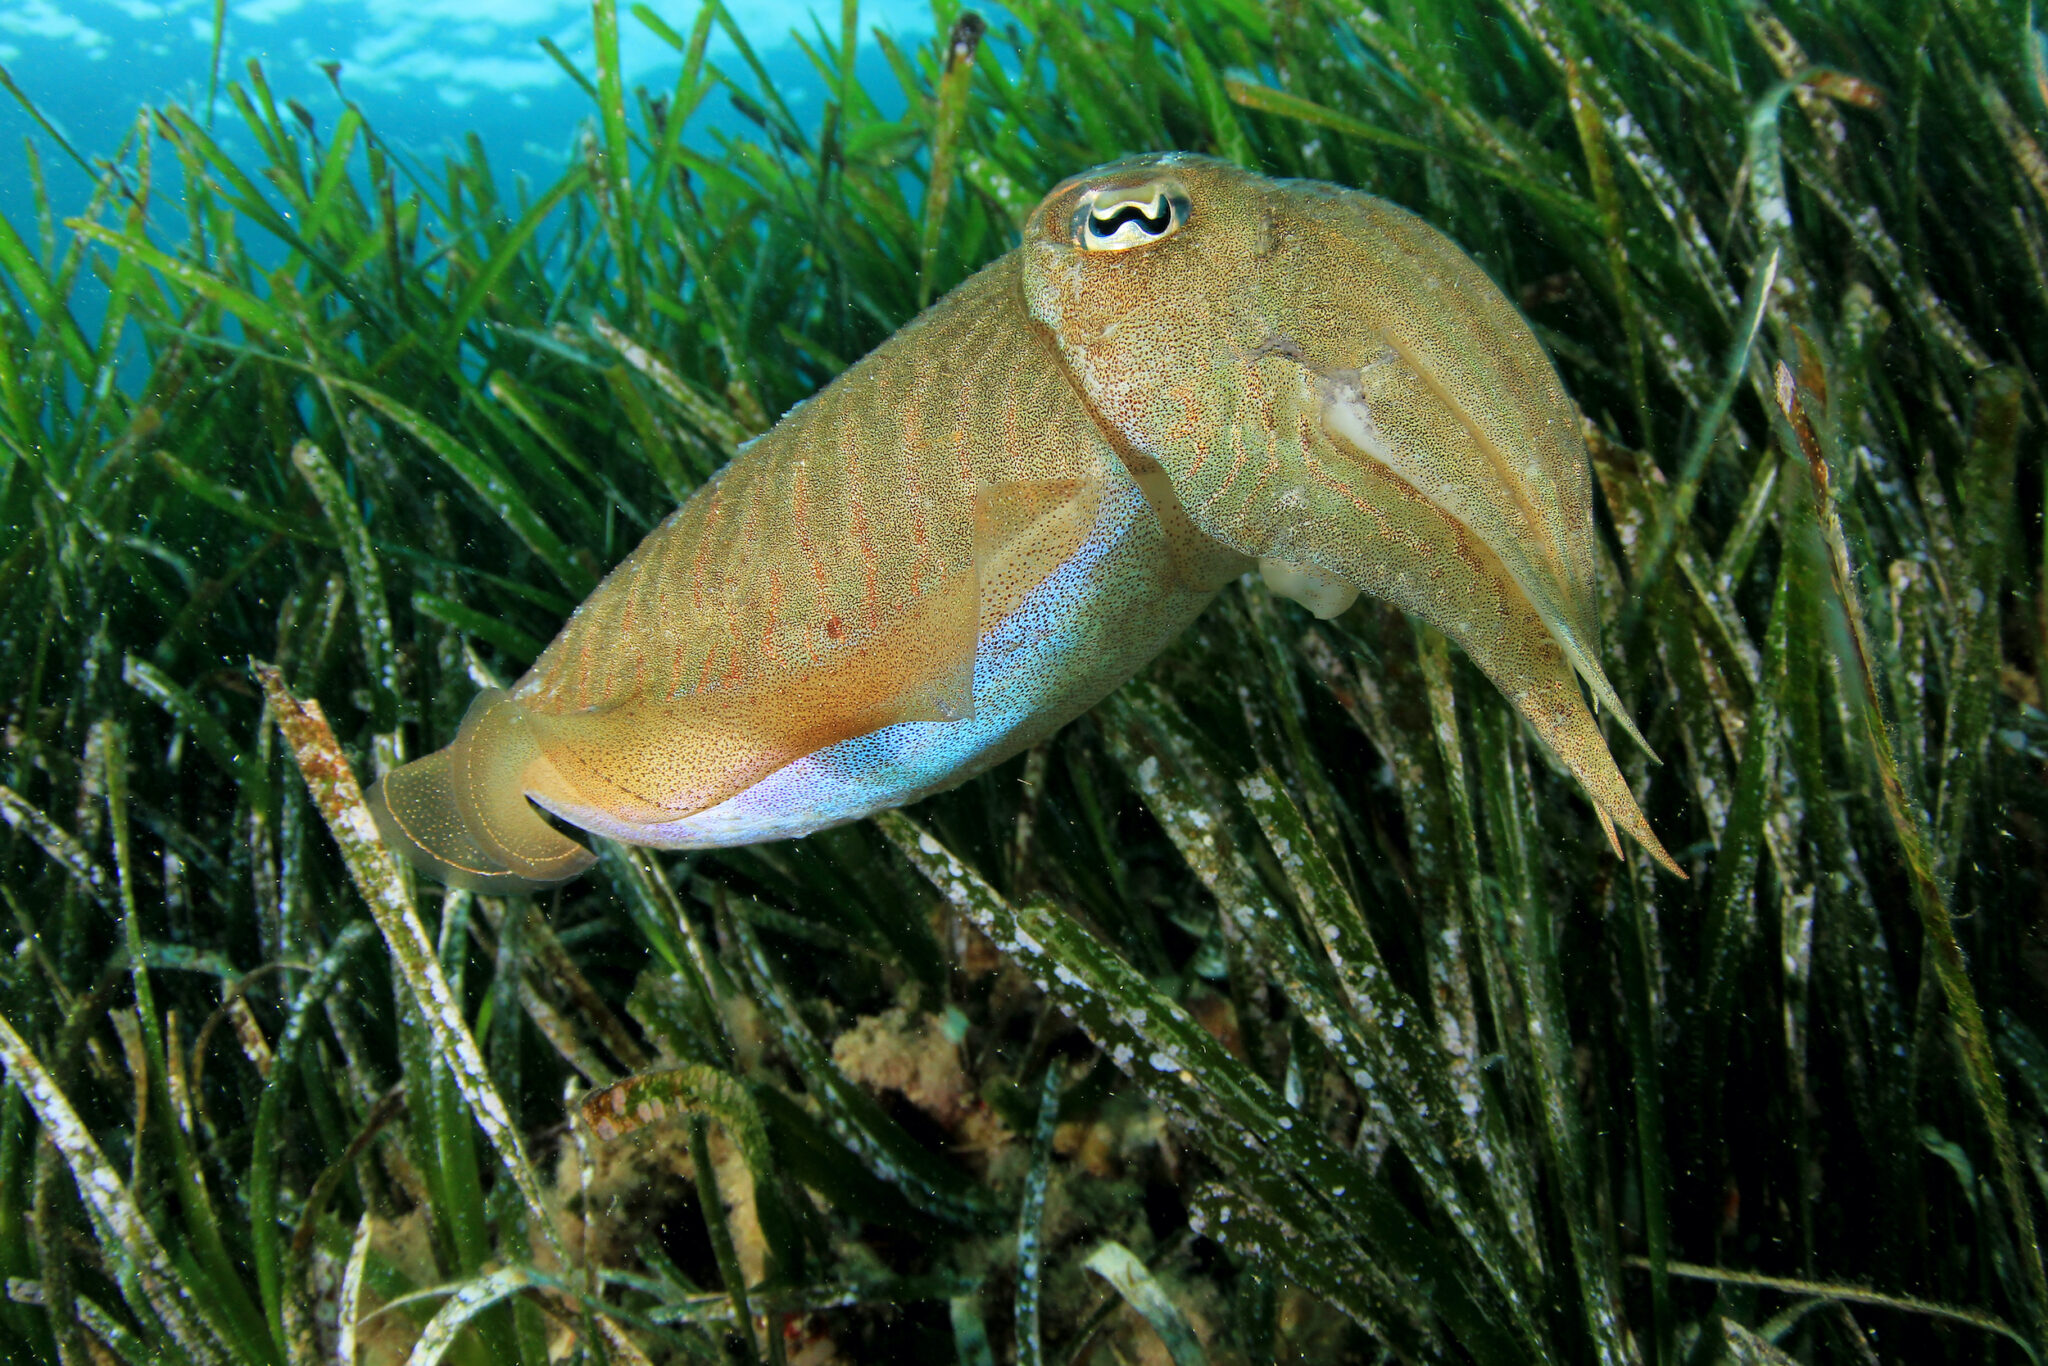 Cuttle fish are just one type of marine life for Brits to see in top dive travel destinations throughout Europe